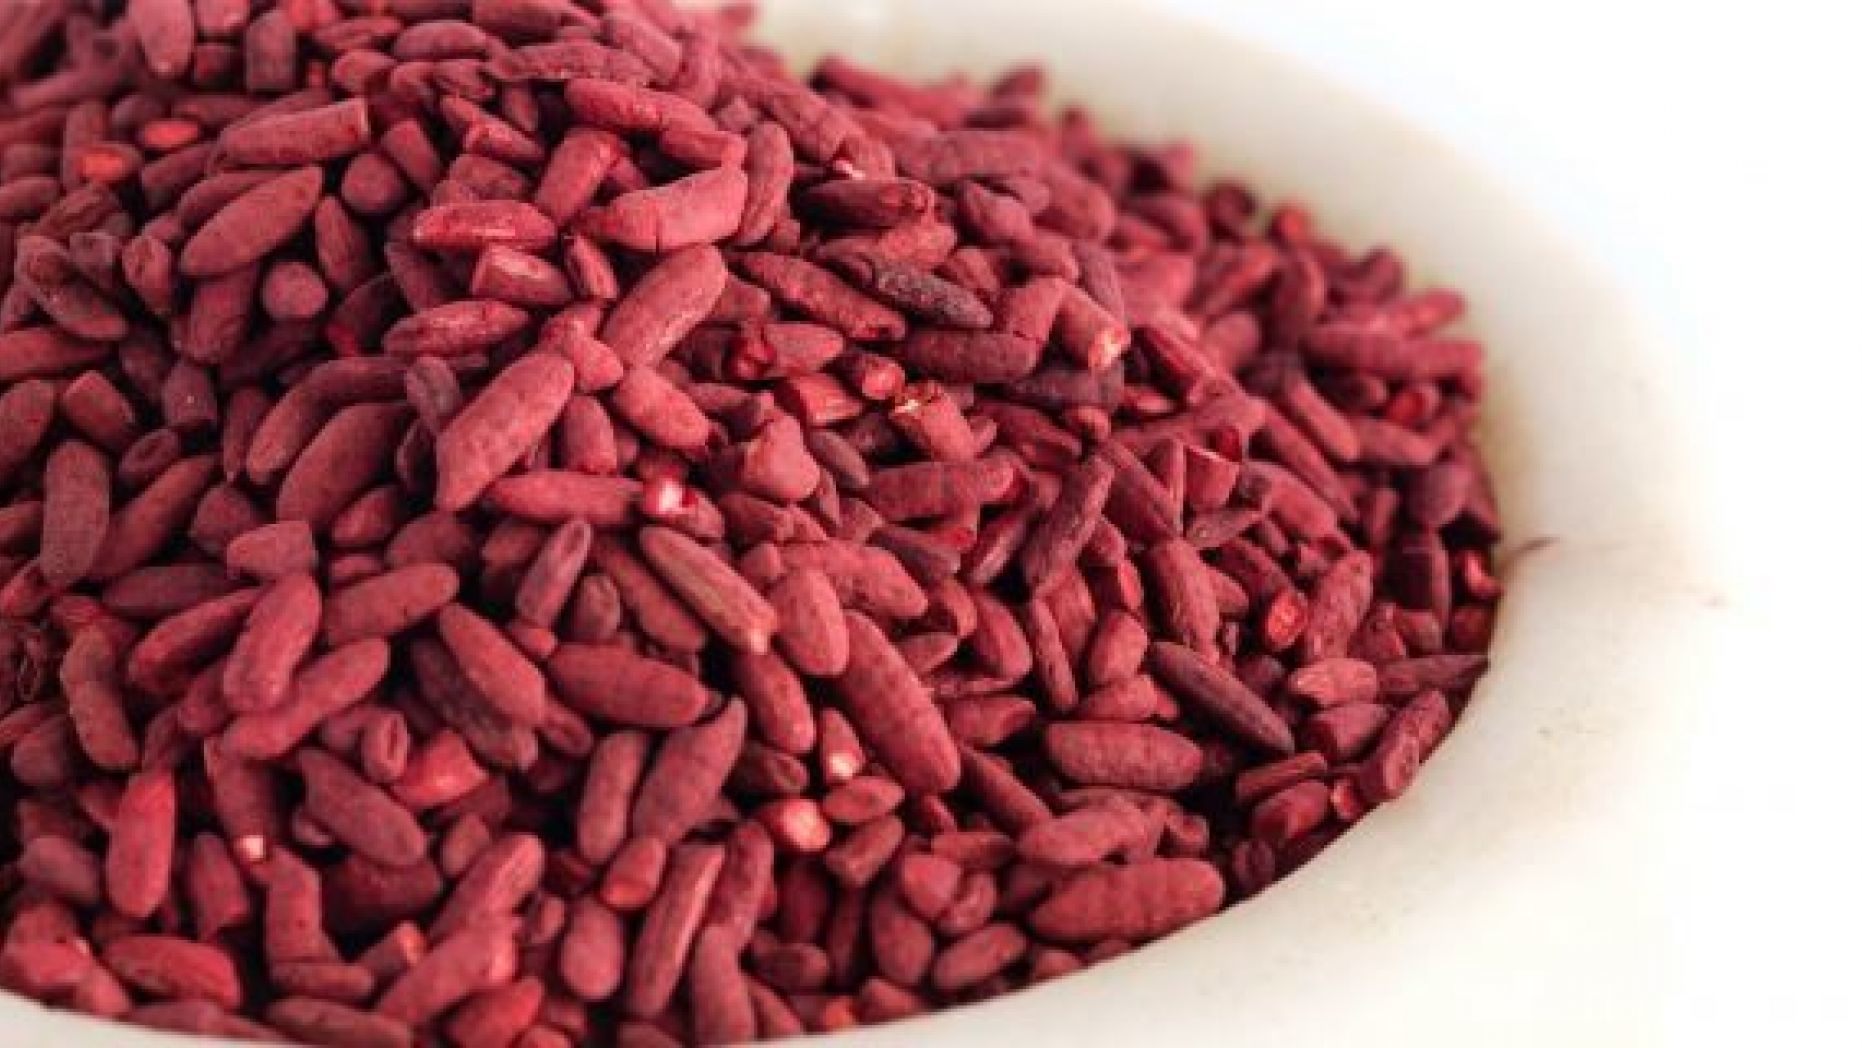 A woman in Michigan developed sudden liver damage after taking a red yeast rice supplement, doctors reported.